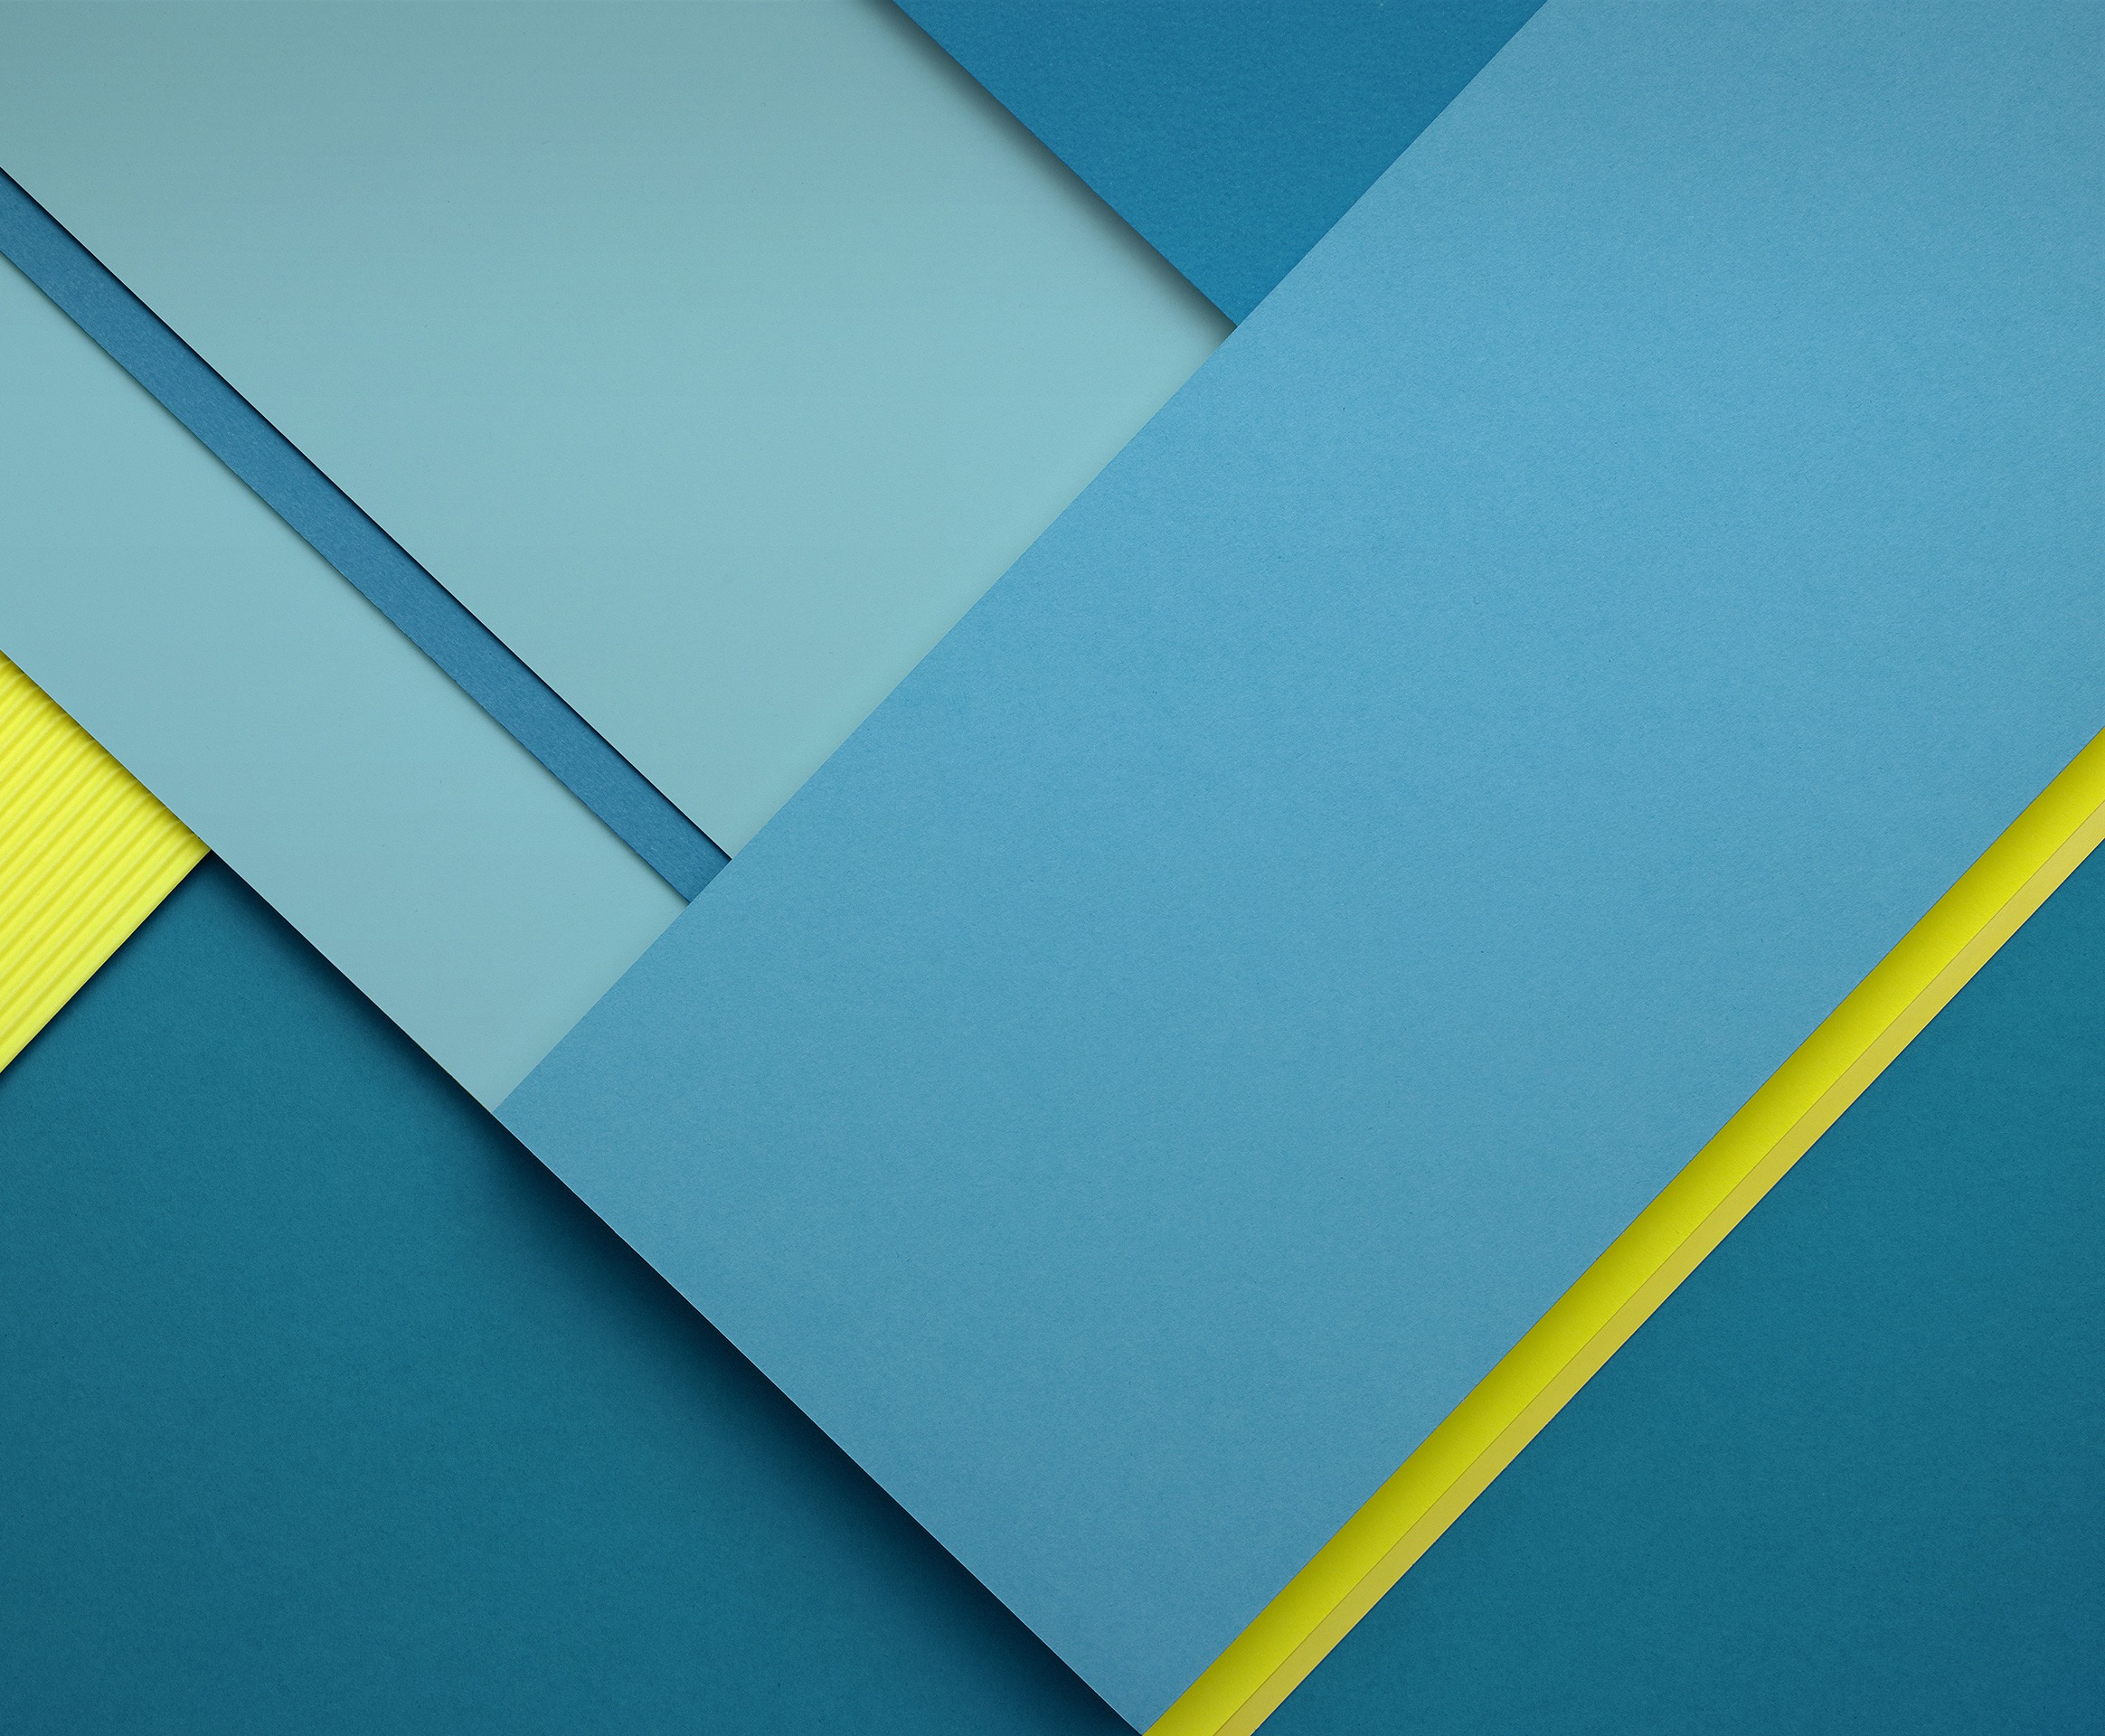 Lollipop Wallpaper Android L Stand For